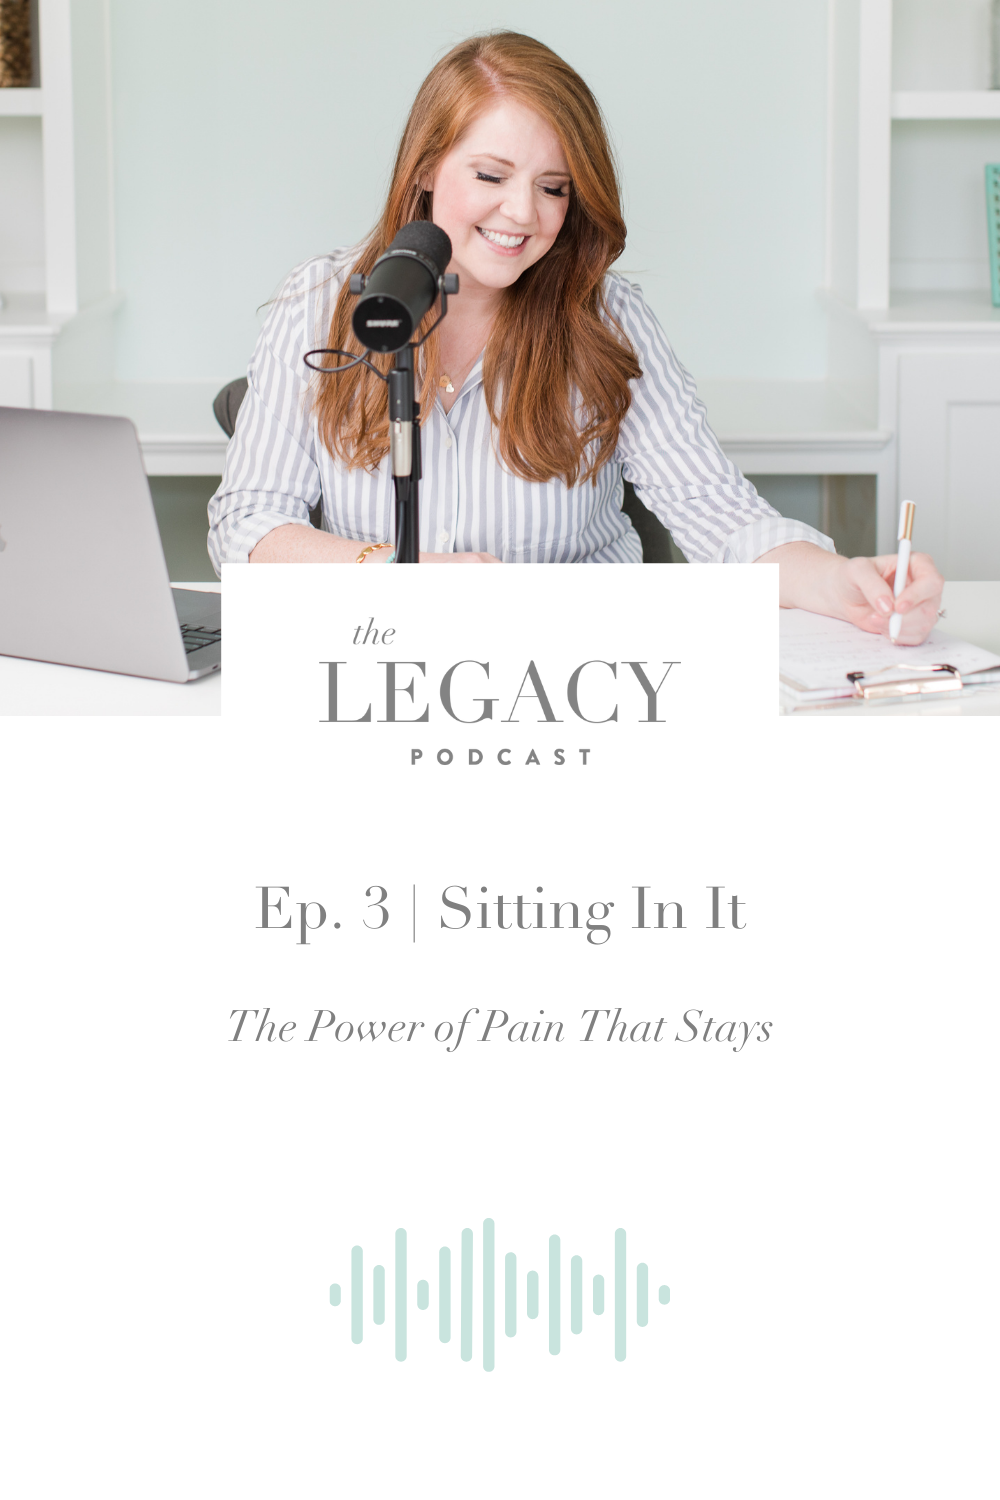 Ep. 3 Sitting In It- The Power of Pain That Stays